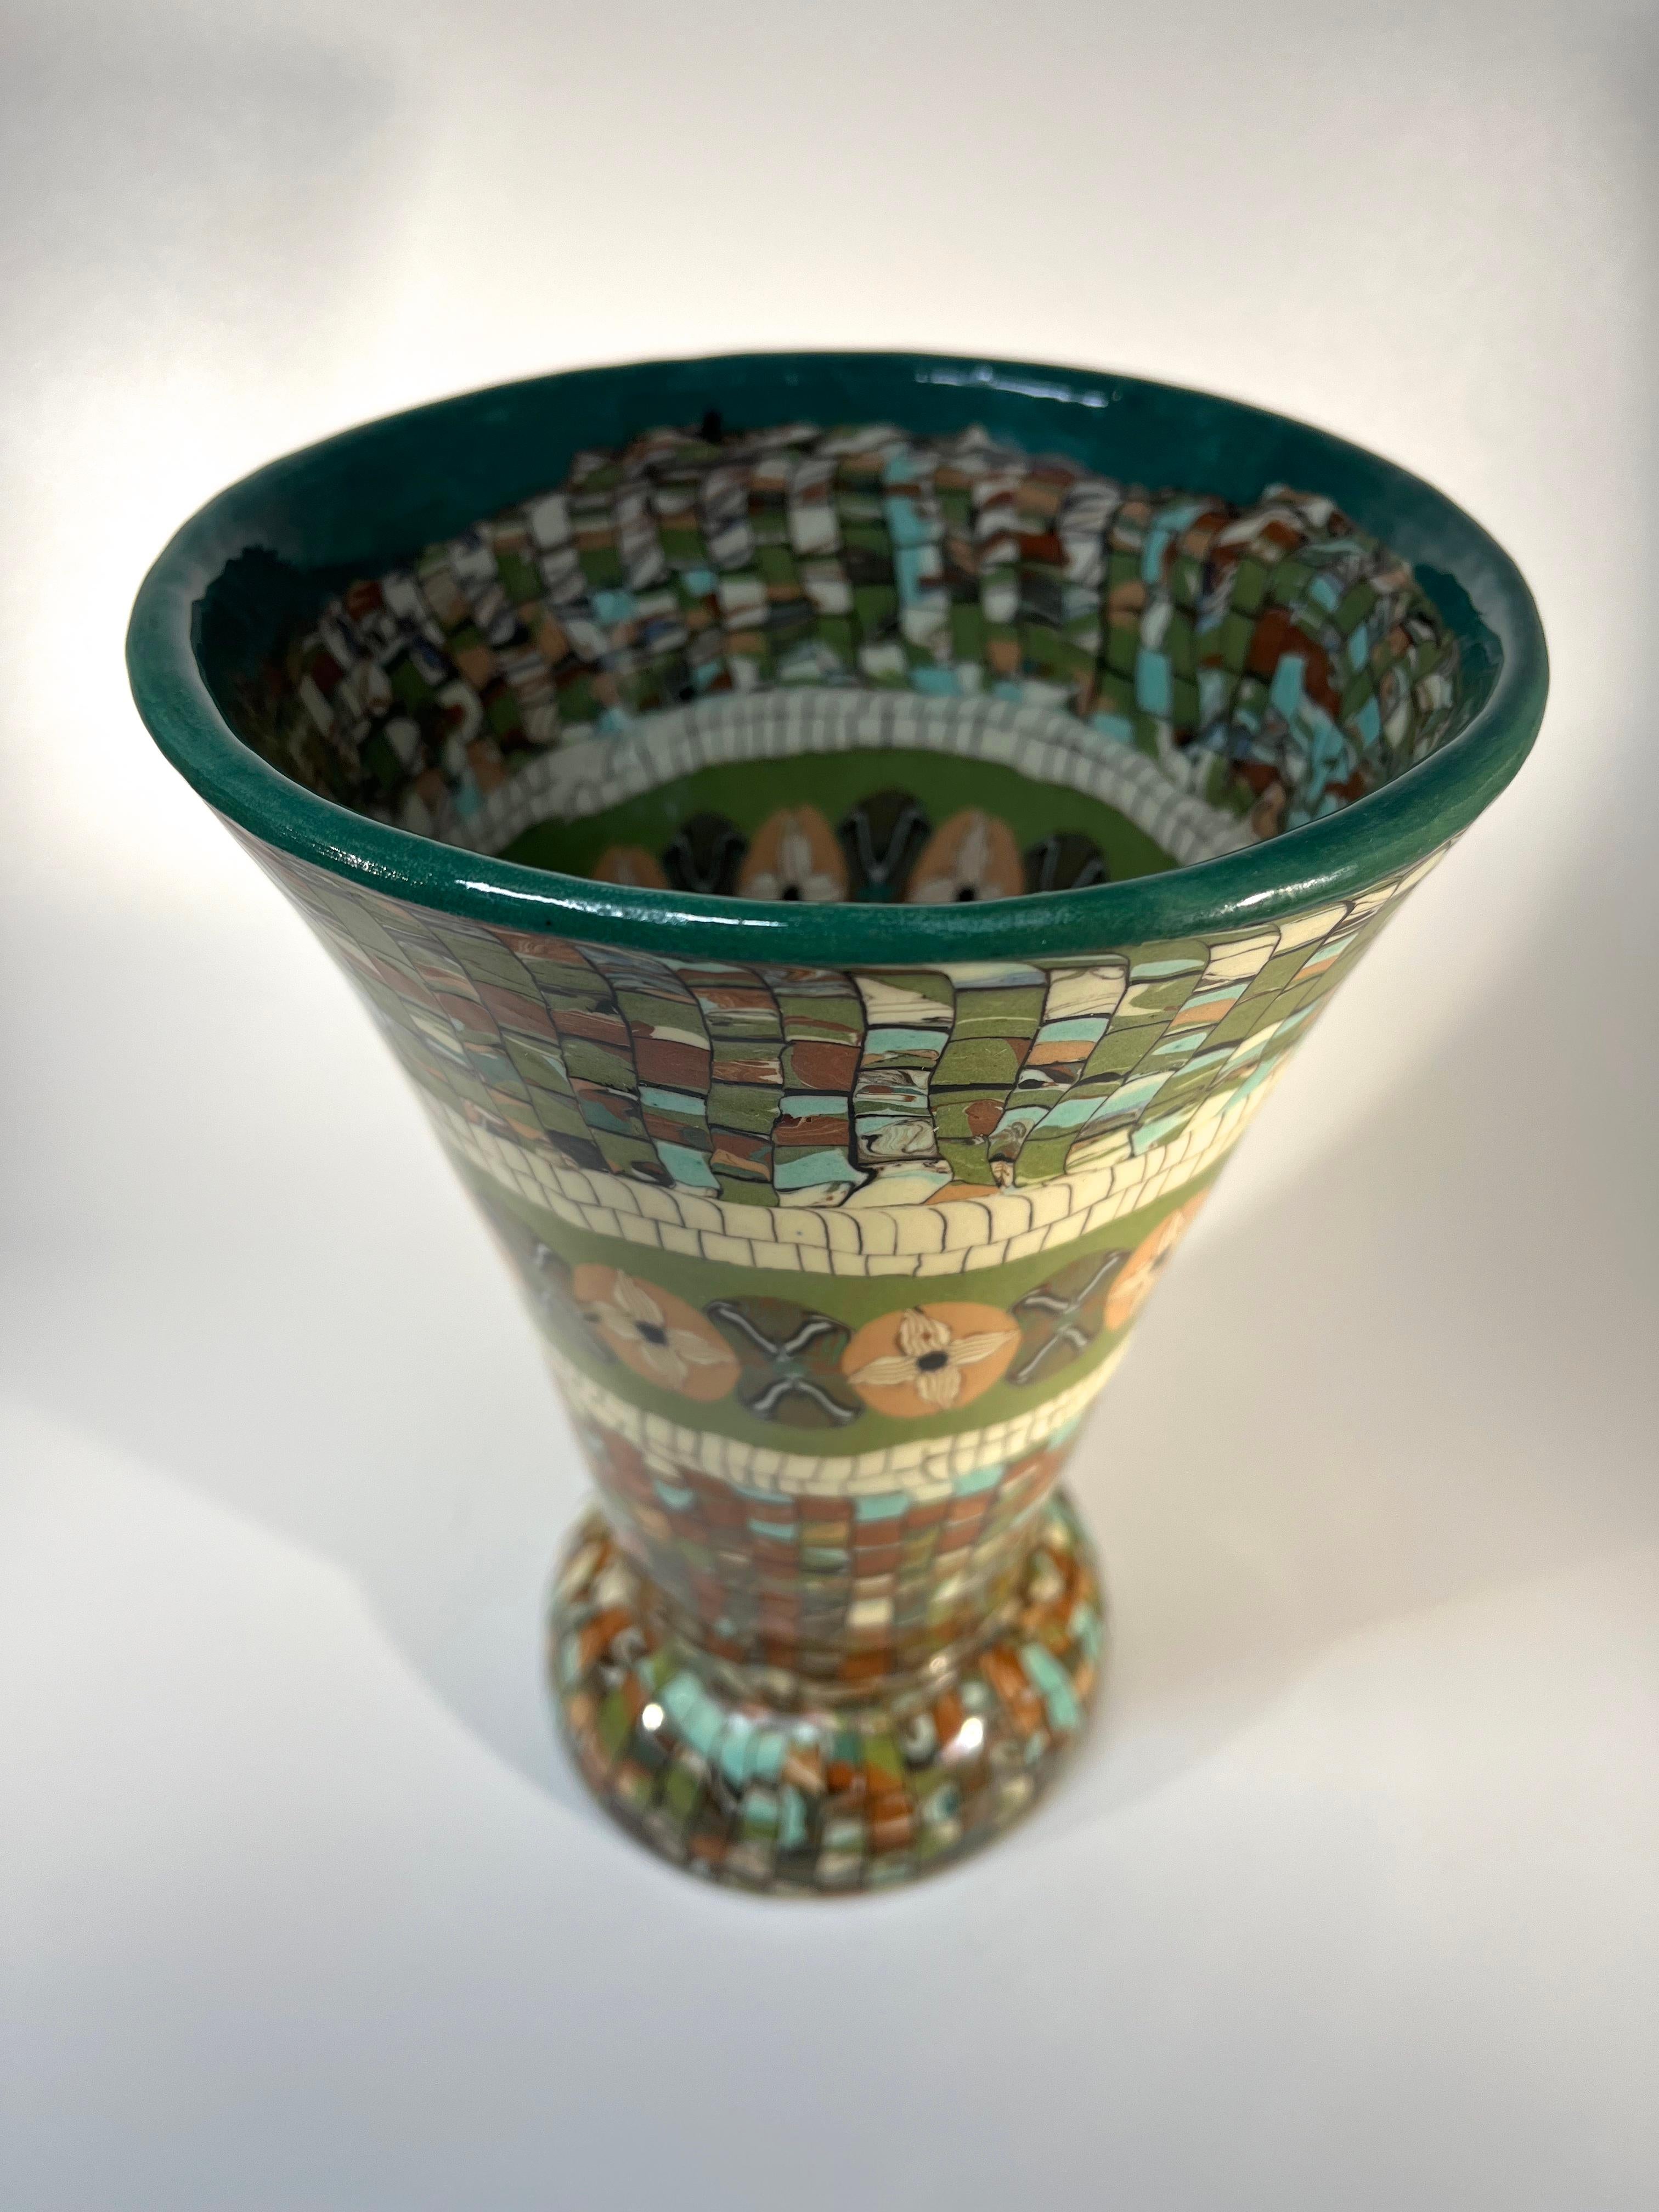 Glazed Marvellous Mosaic Ceramic Vase By Jean Gerbino For Vallauris, France For Sale